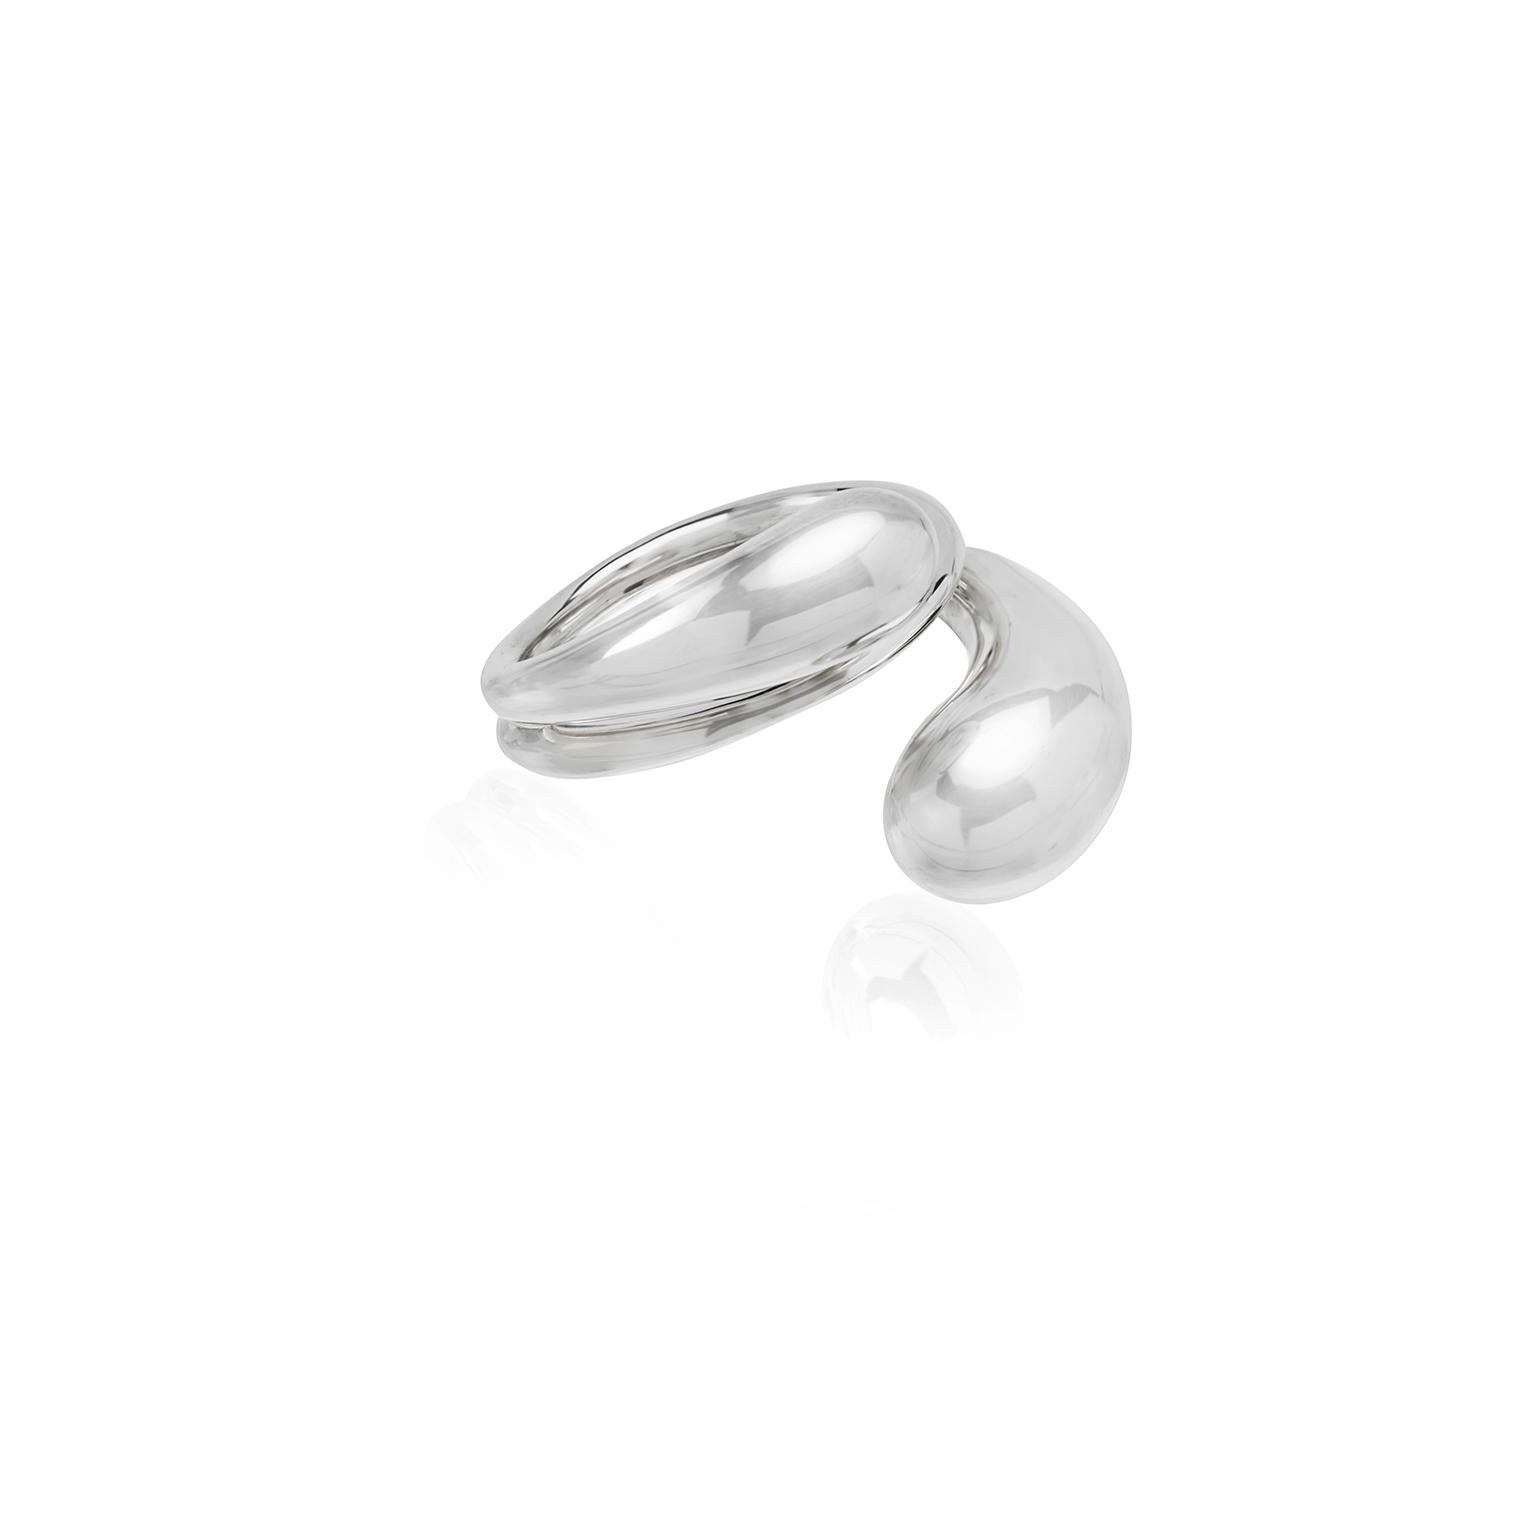 Two delicate water drops play together around the finger in this handmade sterling silver ring. A beautiful, dynamic collection that evokes the movement of the body. Created to form a stunning musical score on the skin, it honors the essential